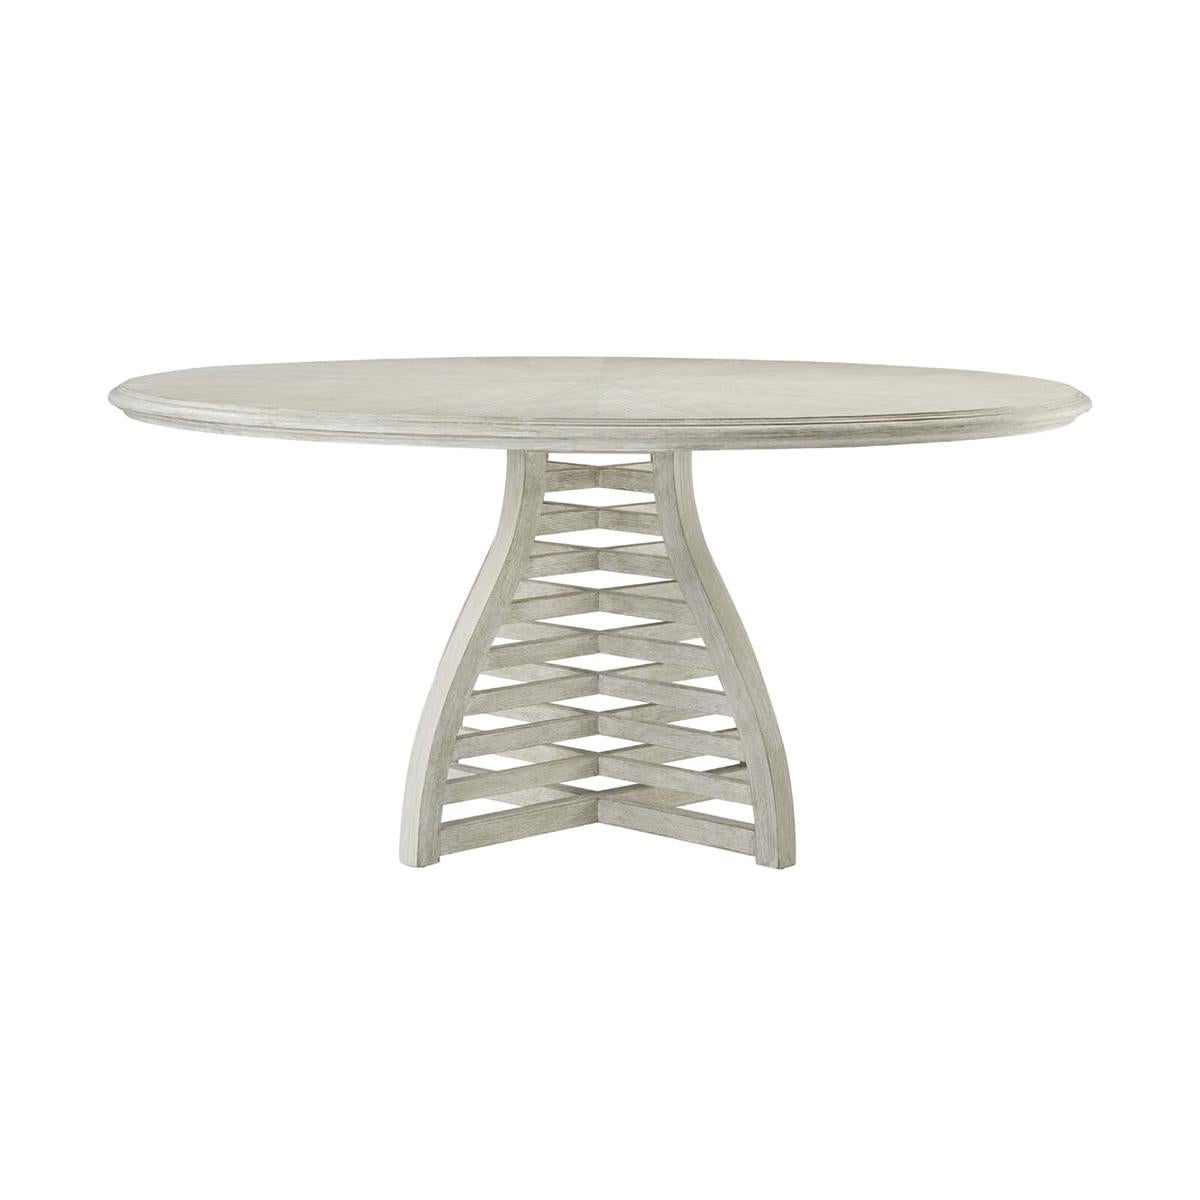 Modern coastal dining table, functional and visually appealing, the slatted dining table is the perfect dining table for your party of four. This uniquely designed table reflects a sunburst patterned top with a shaped slatted base. With a